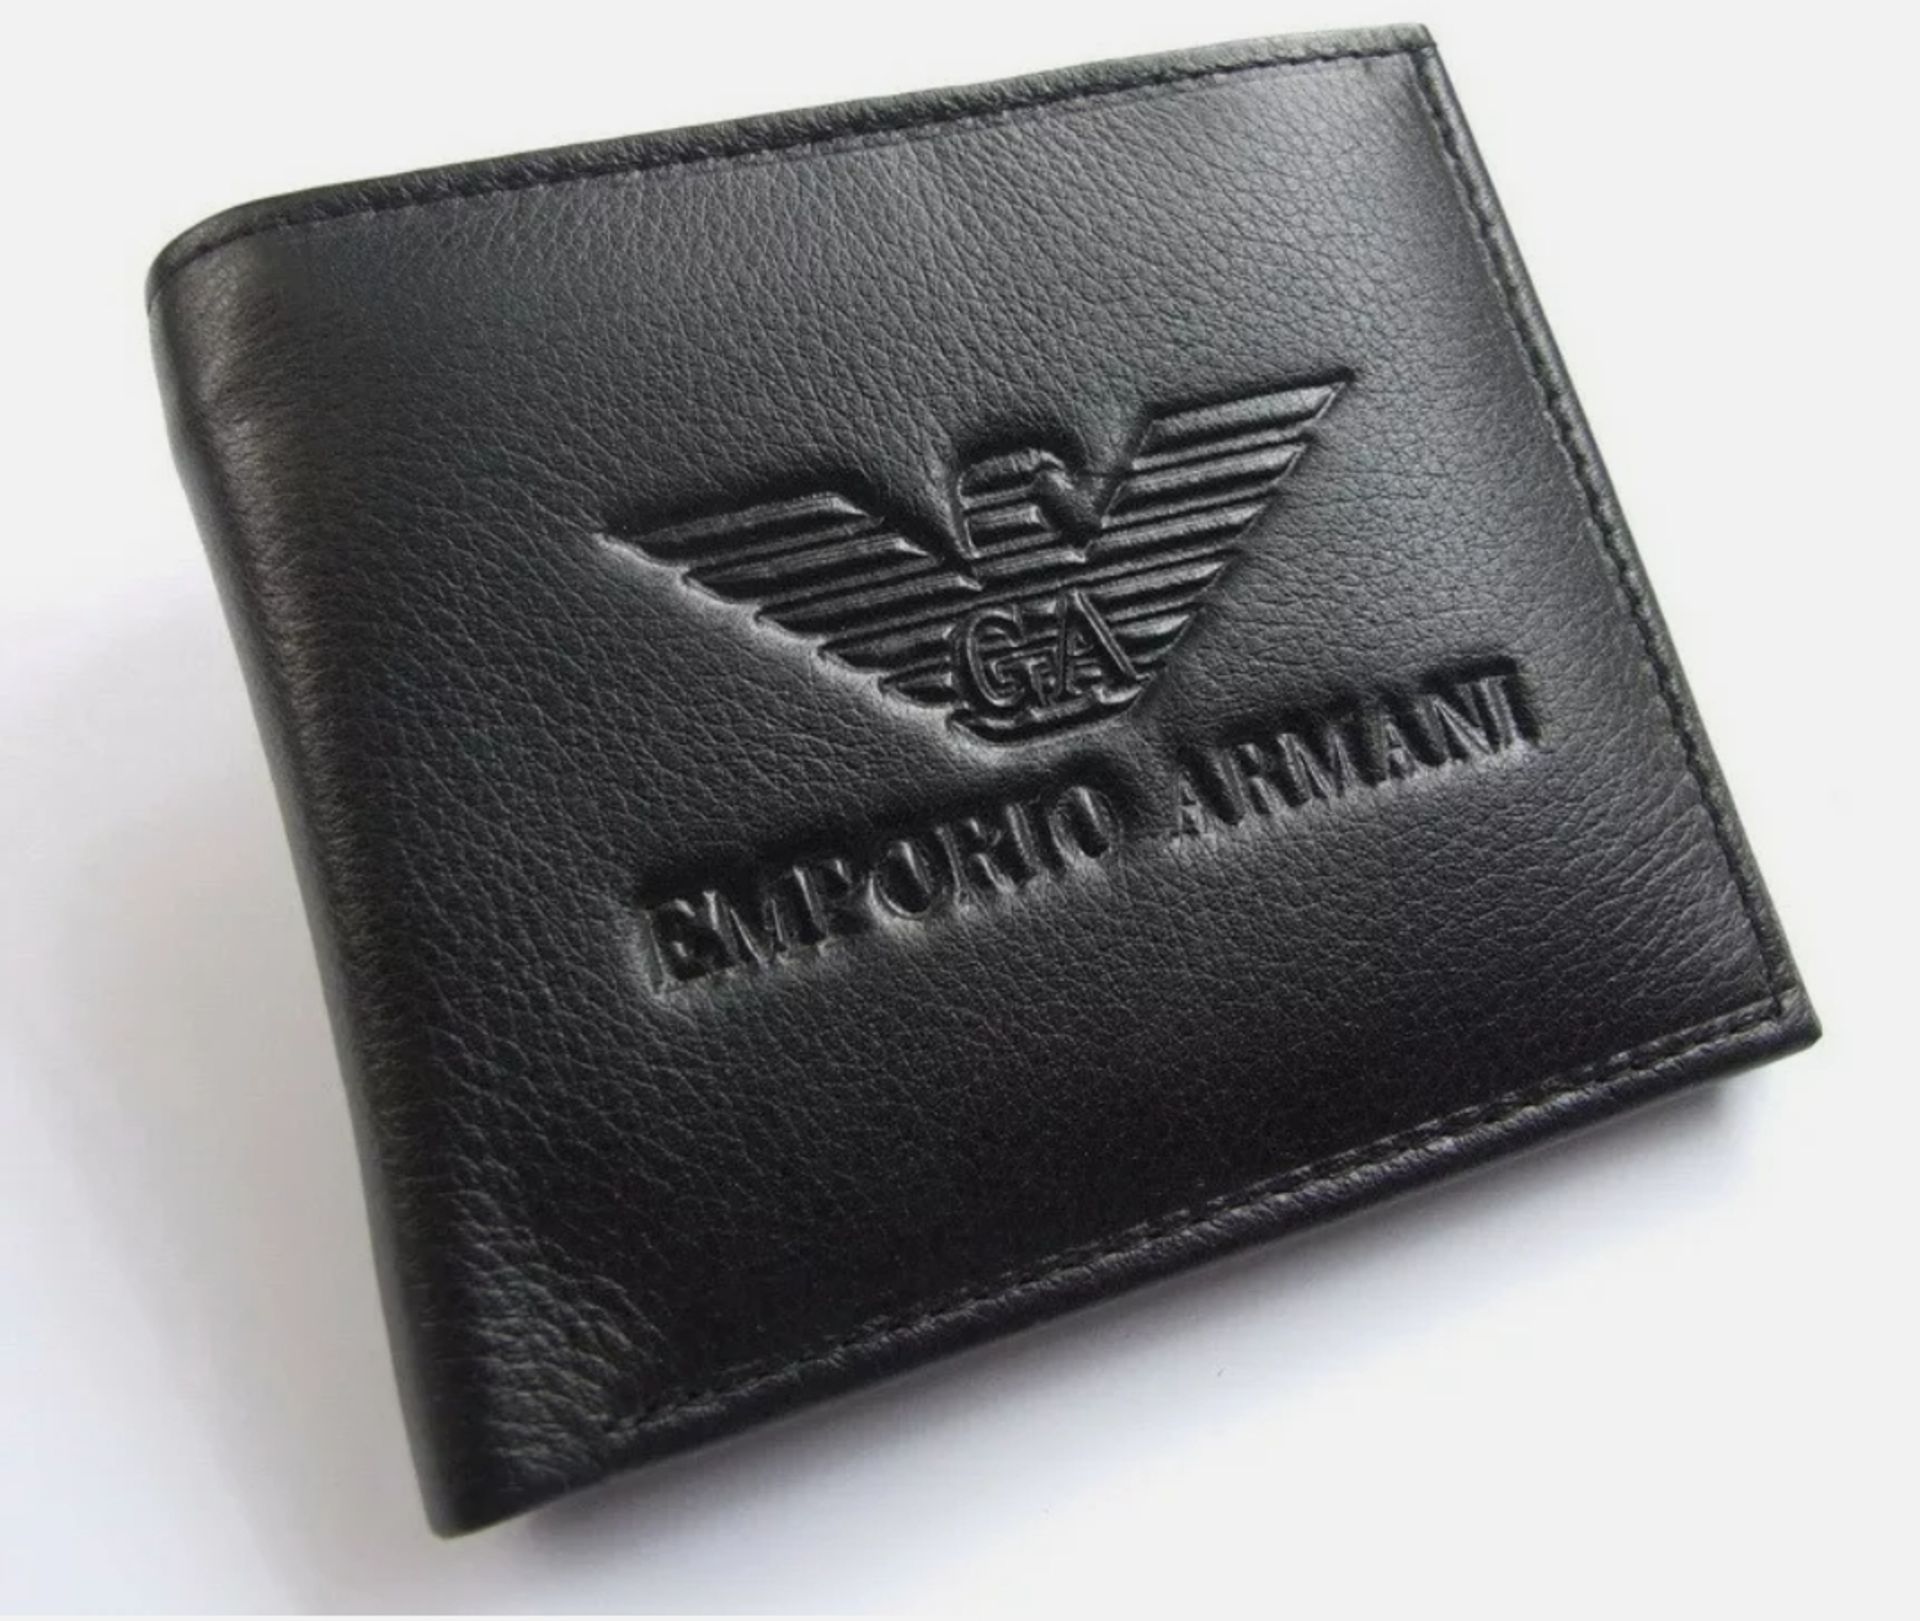 Emporio Armani Men's Leather Wallet - New With Box